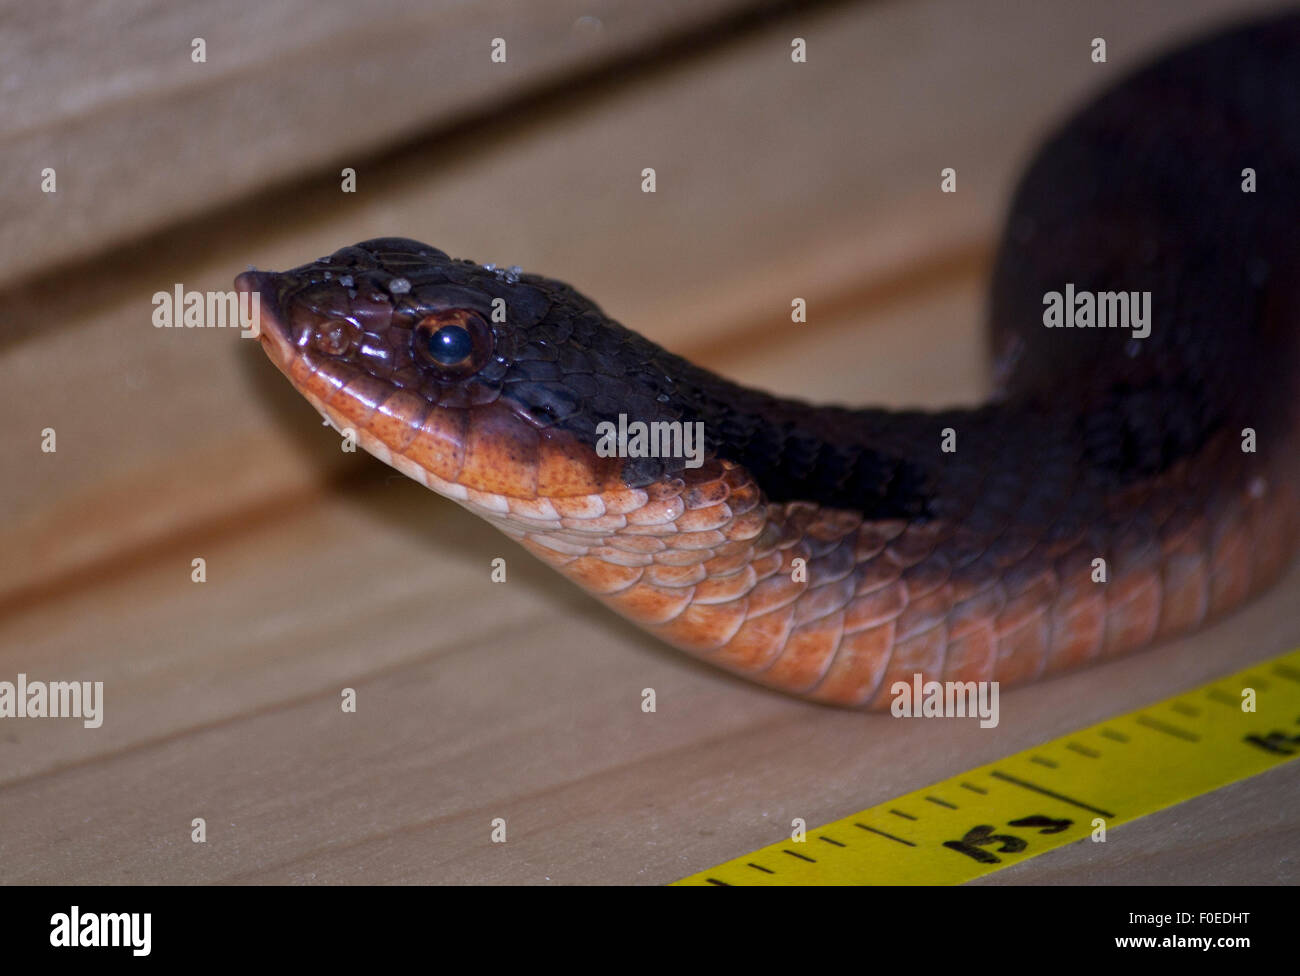 Unknown snake a friend of mine captured. Stock Photo